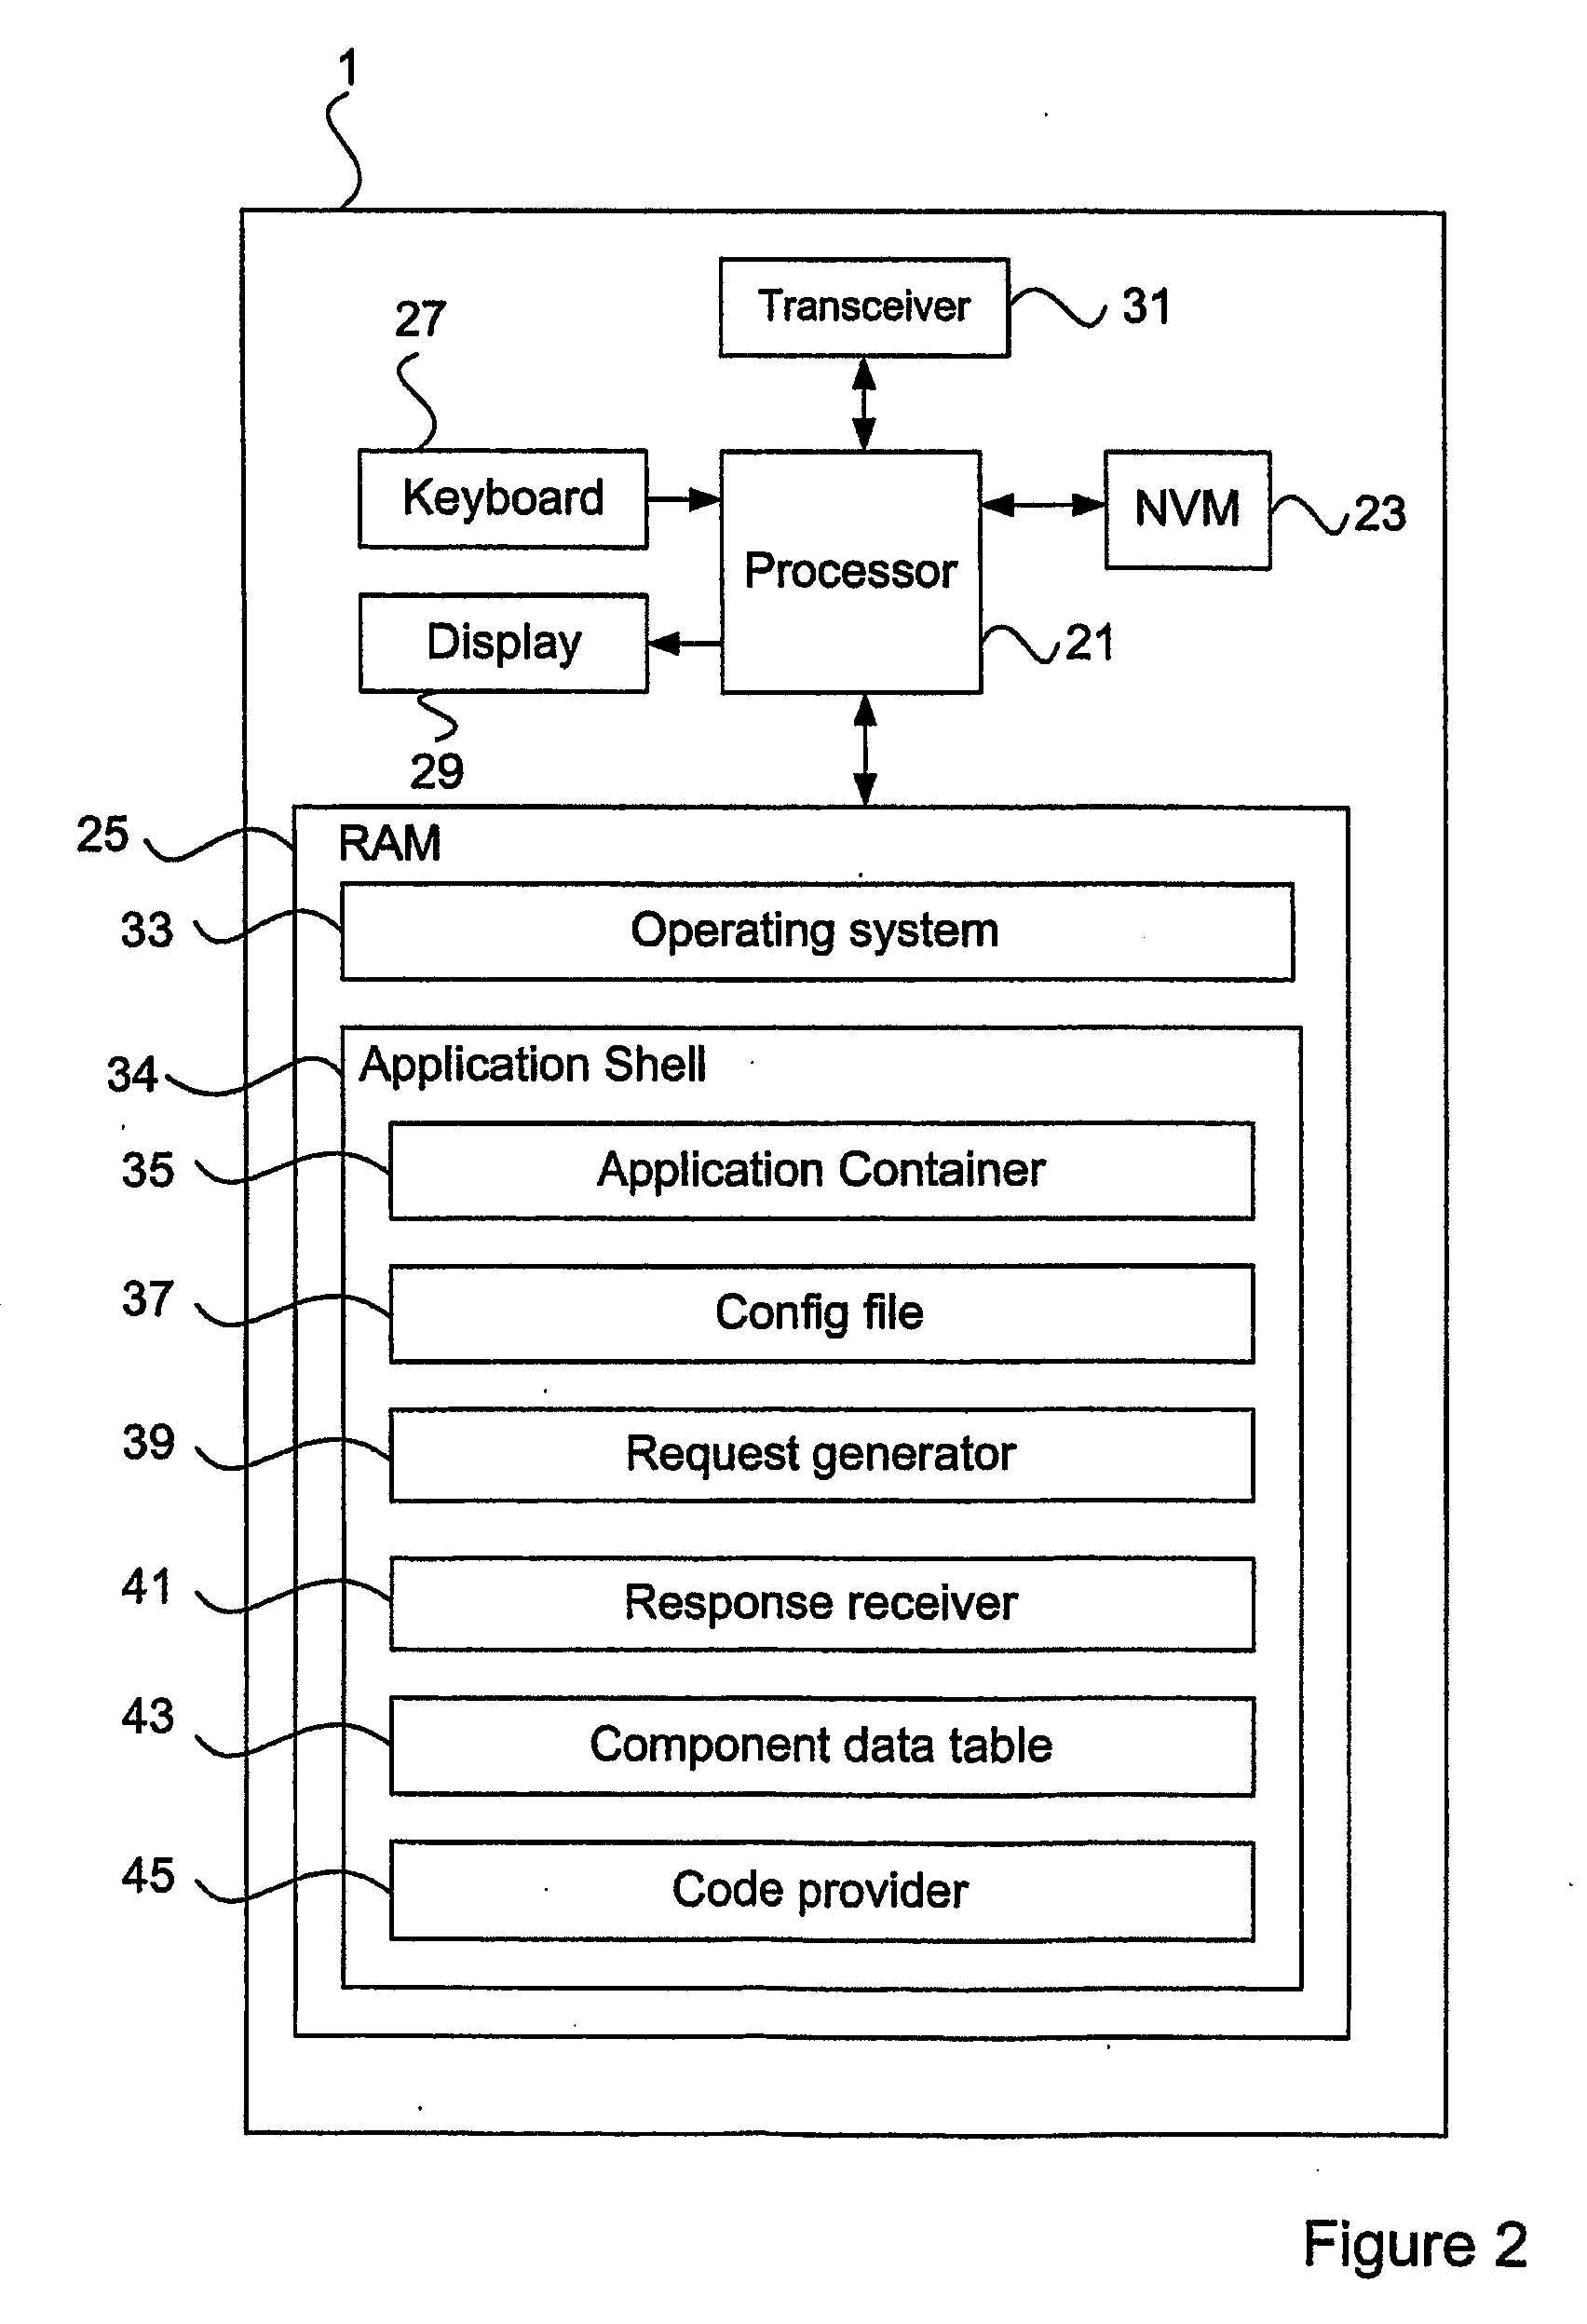 Computing system for providing software components on demand to a mobile device